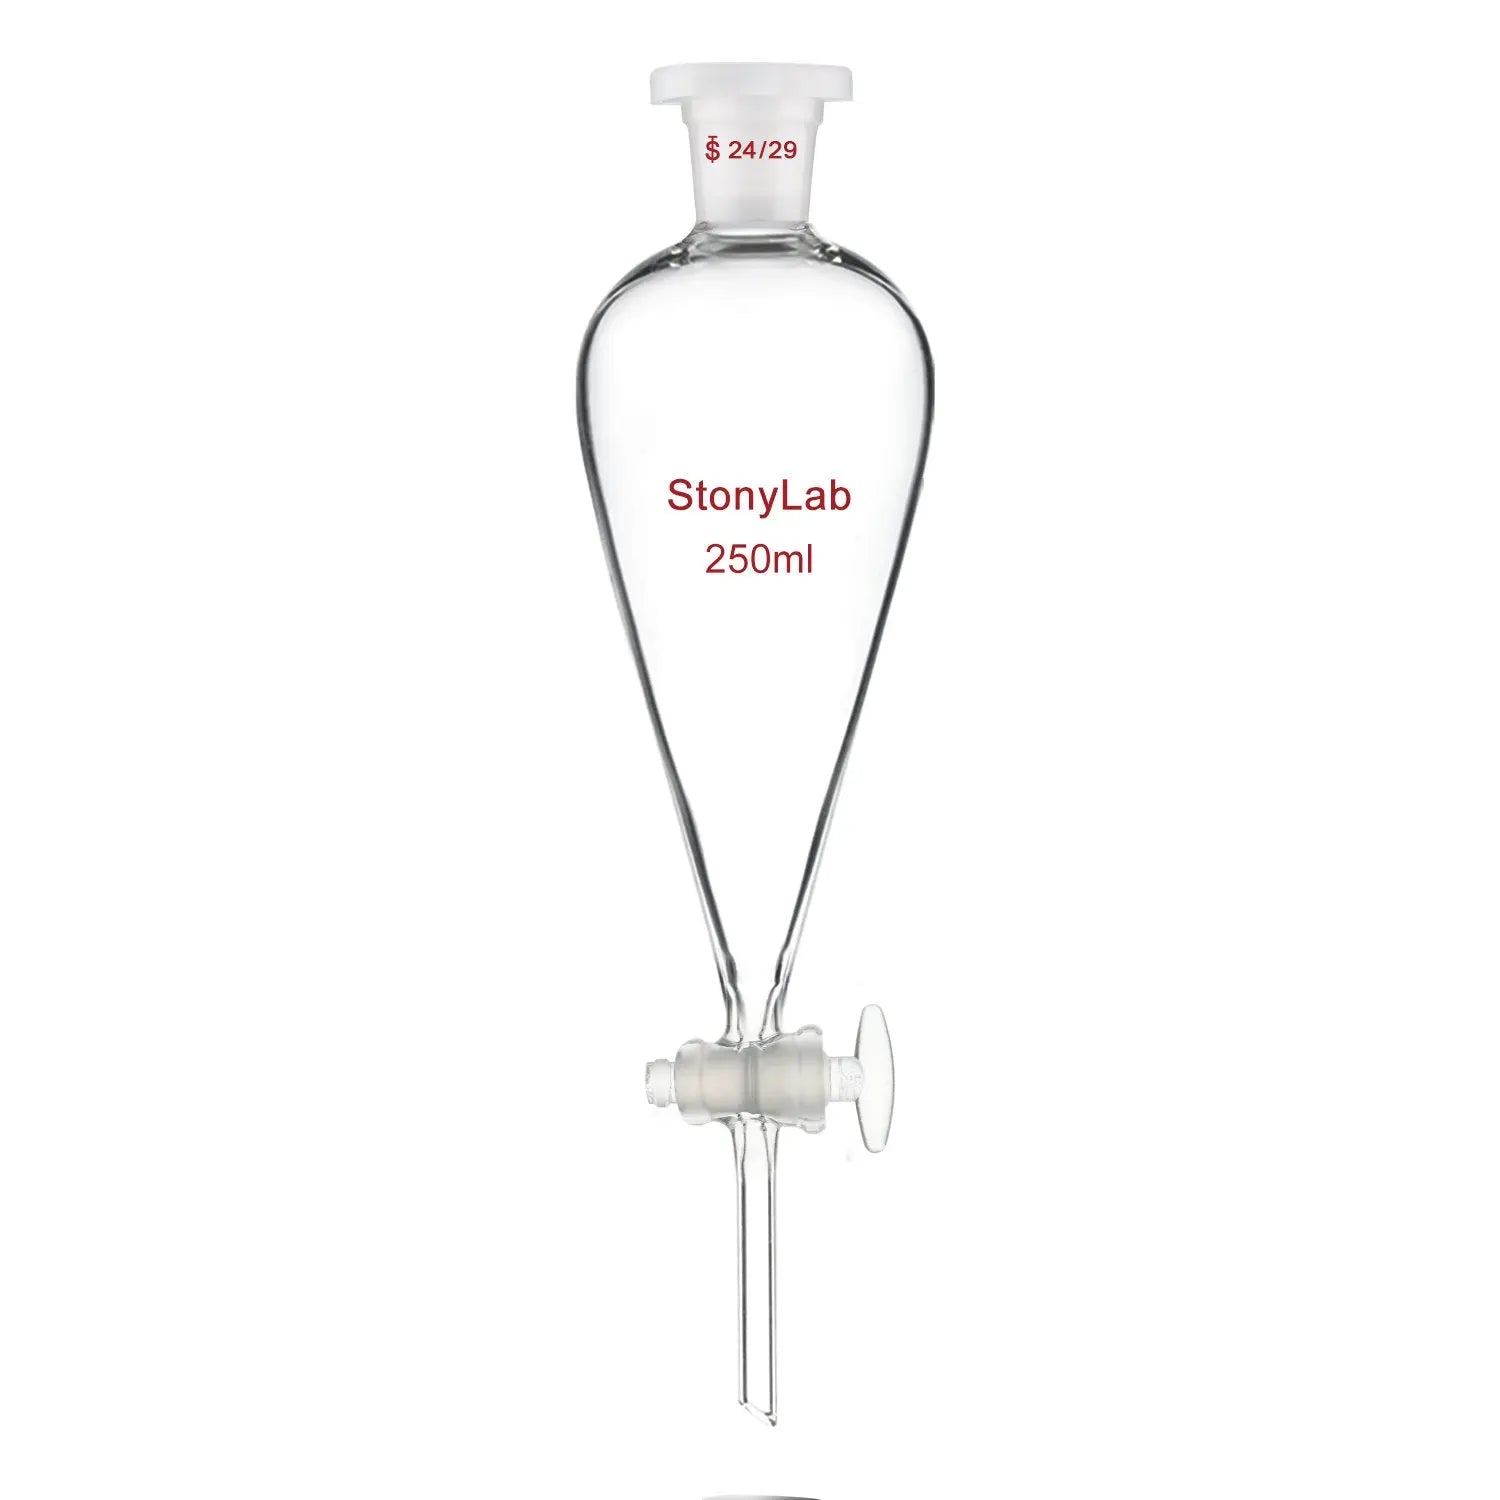 Separatory Funnel with Glass Stopcock Valve - StonyLab Separatory Funnels 250-ml